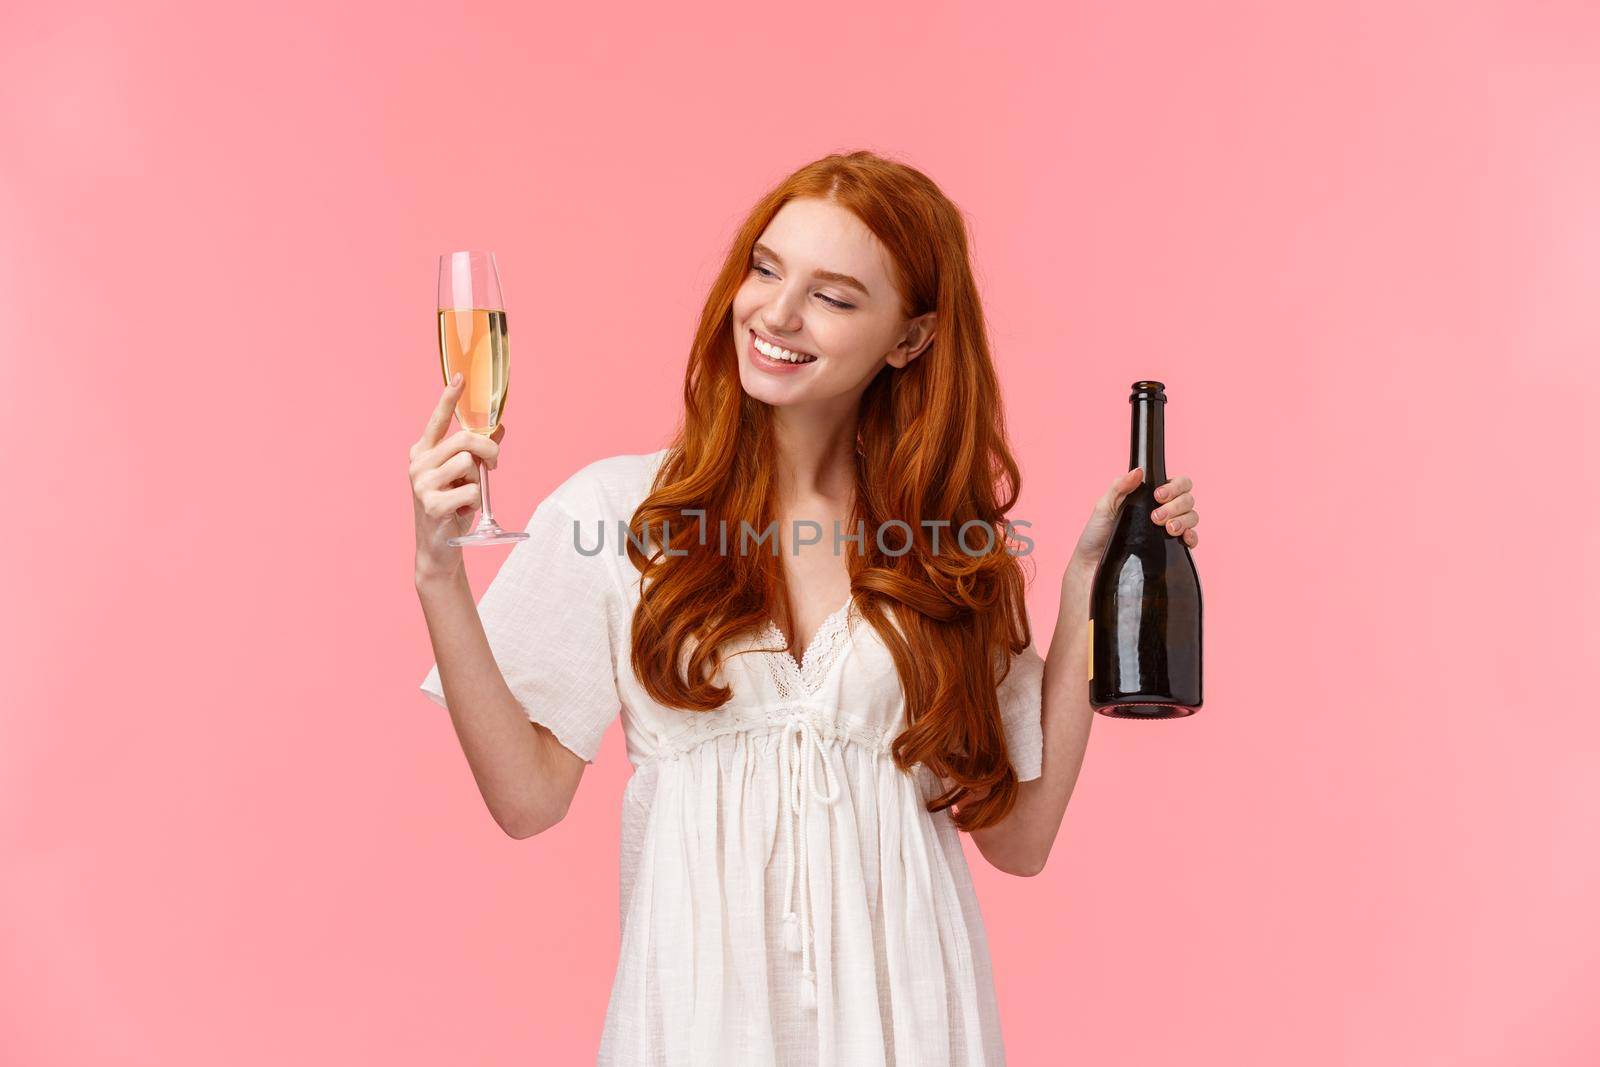 Girl feeling relaxed and happy slightly drunk smiling and looking at poured glass, holding and drinking champagne, grinning, partying on honey moon, standing pink background.